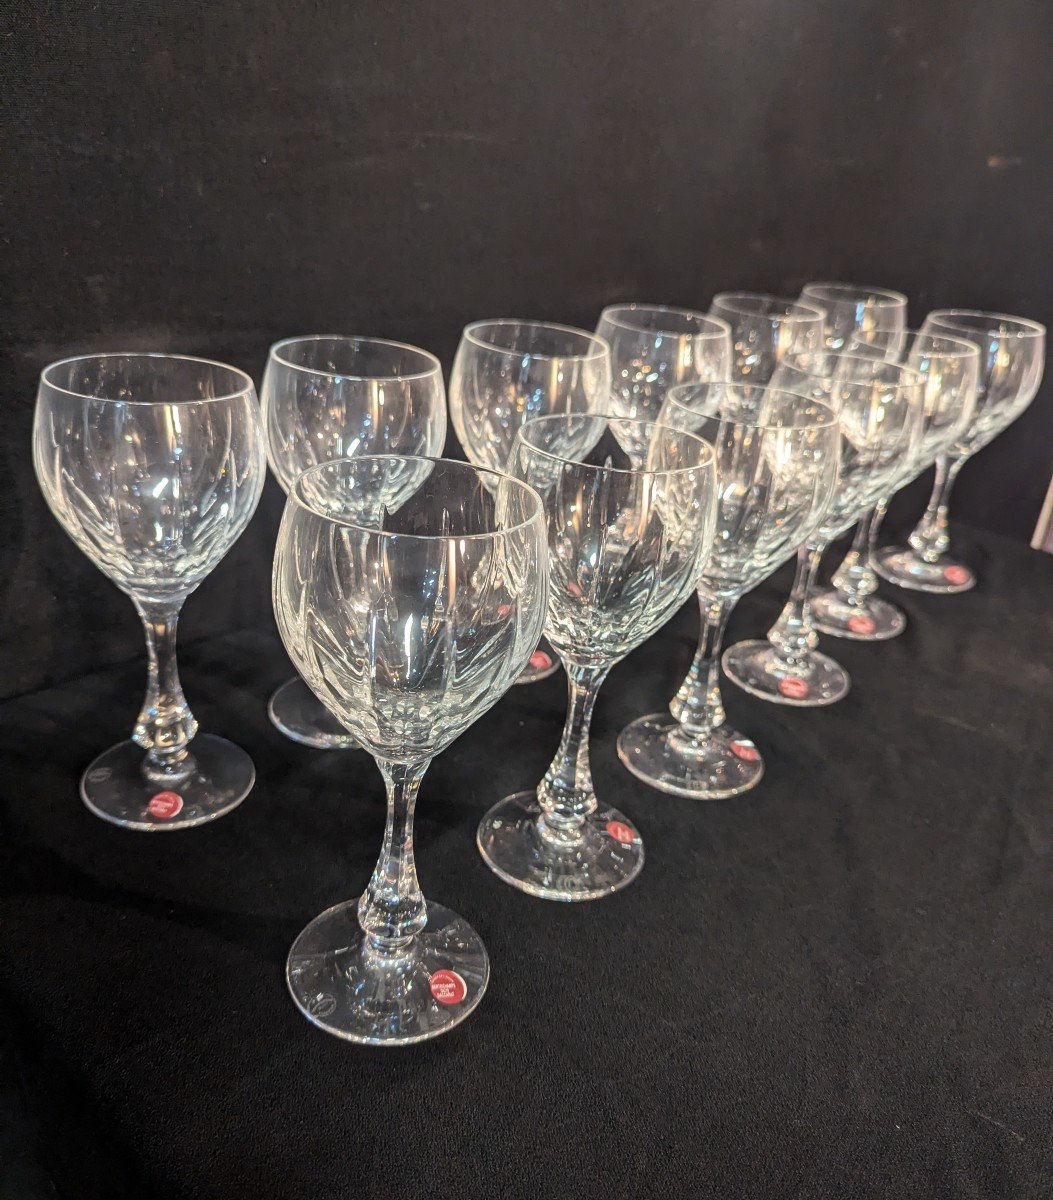 Twelve Water Glasses From Baccarat Cristallerie-photo-2